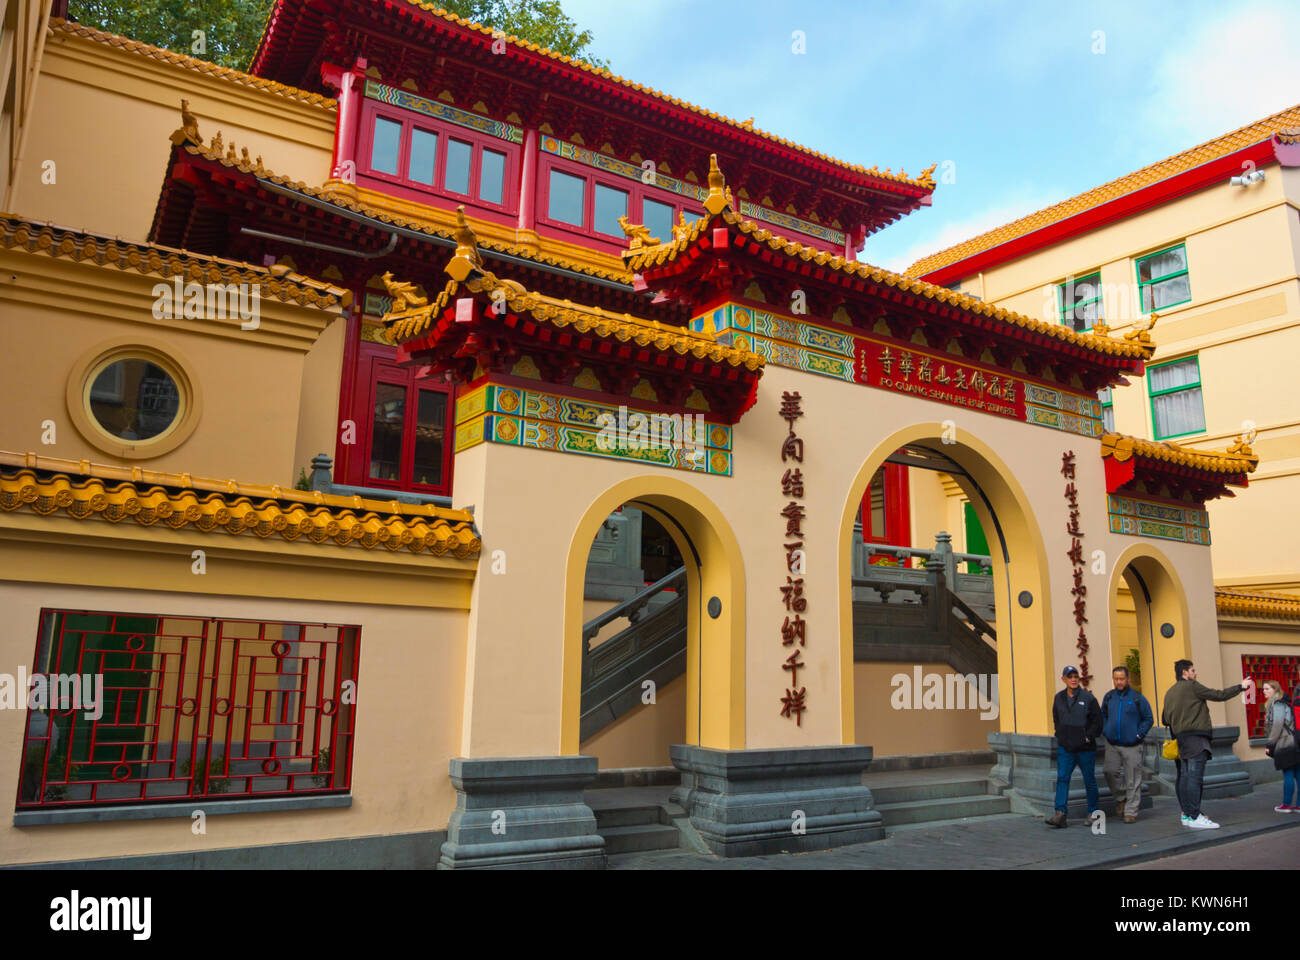 Fo Guang Shan He Hua tempel, buddhist temple, Zeedijk, old town, Amsterdam, The Netherlands Stock Photo